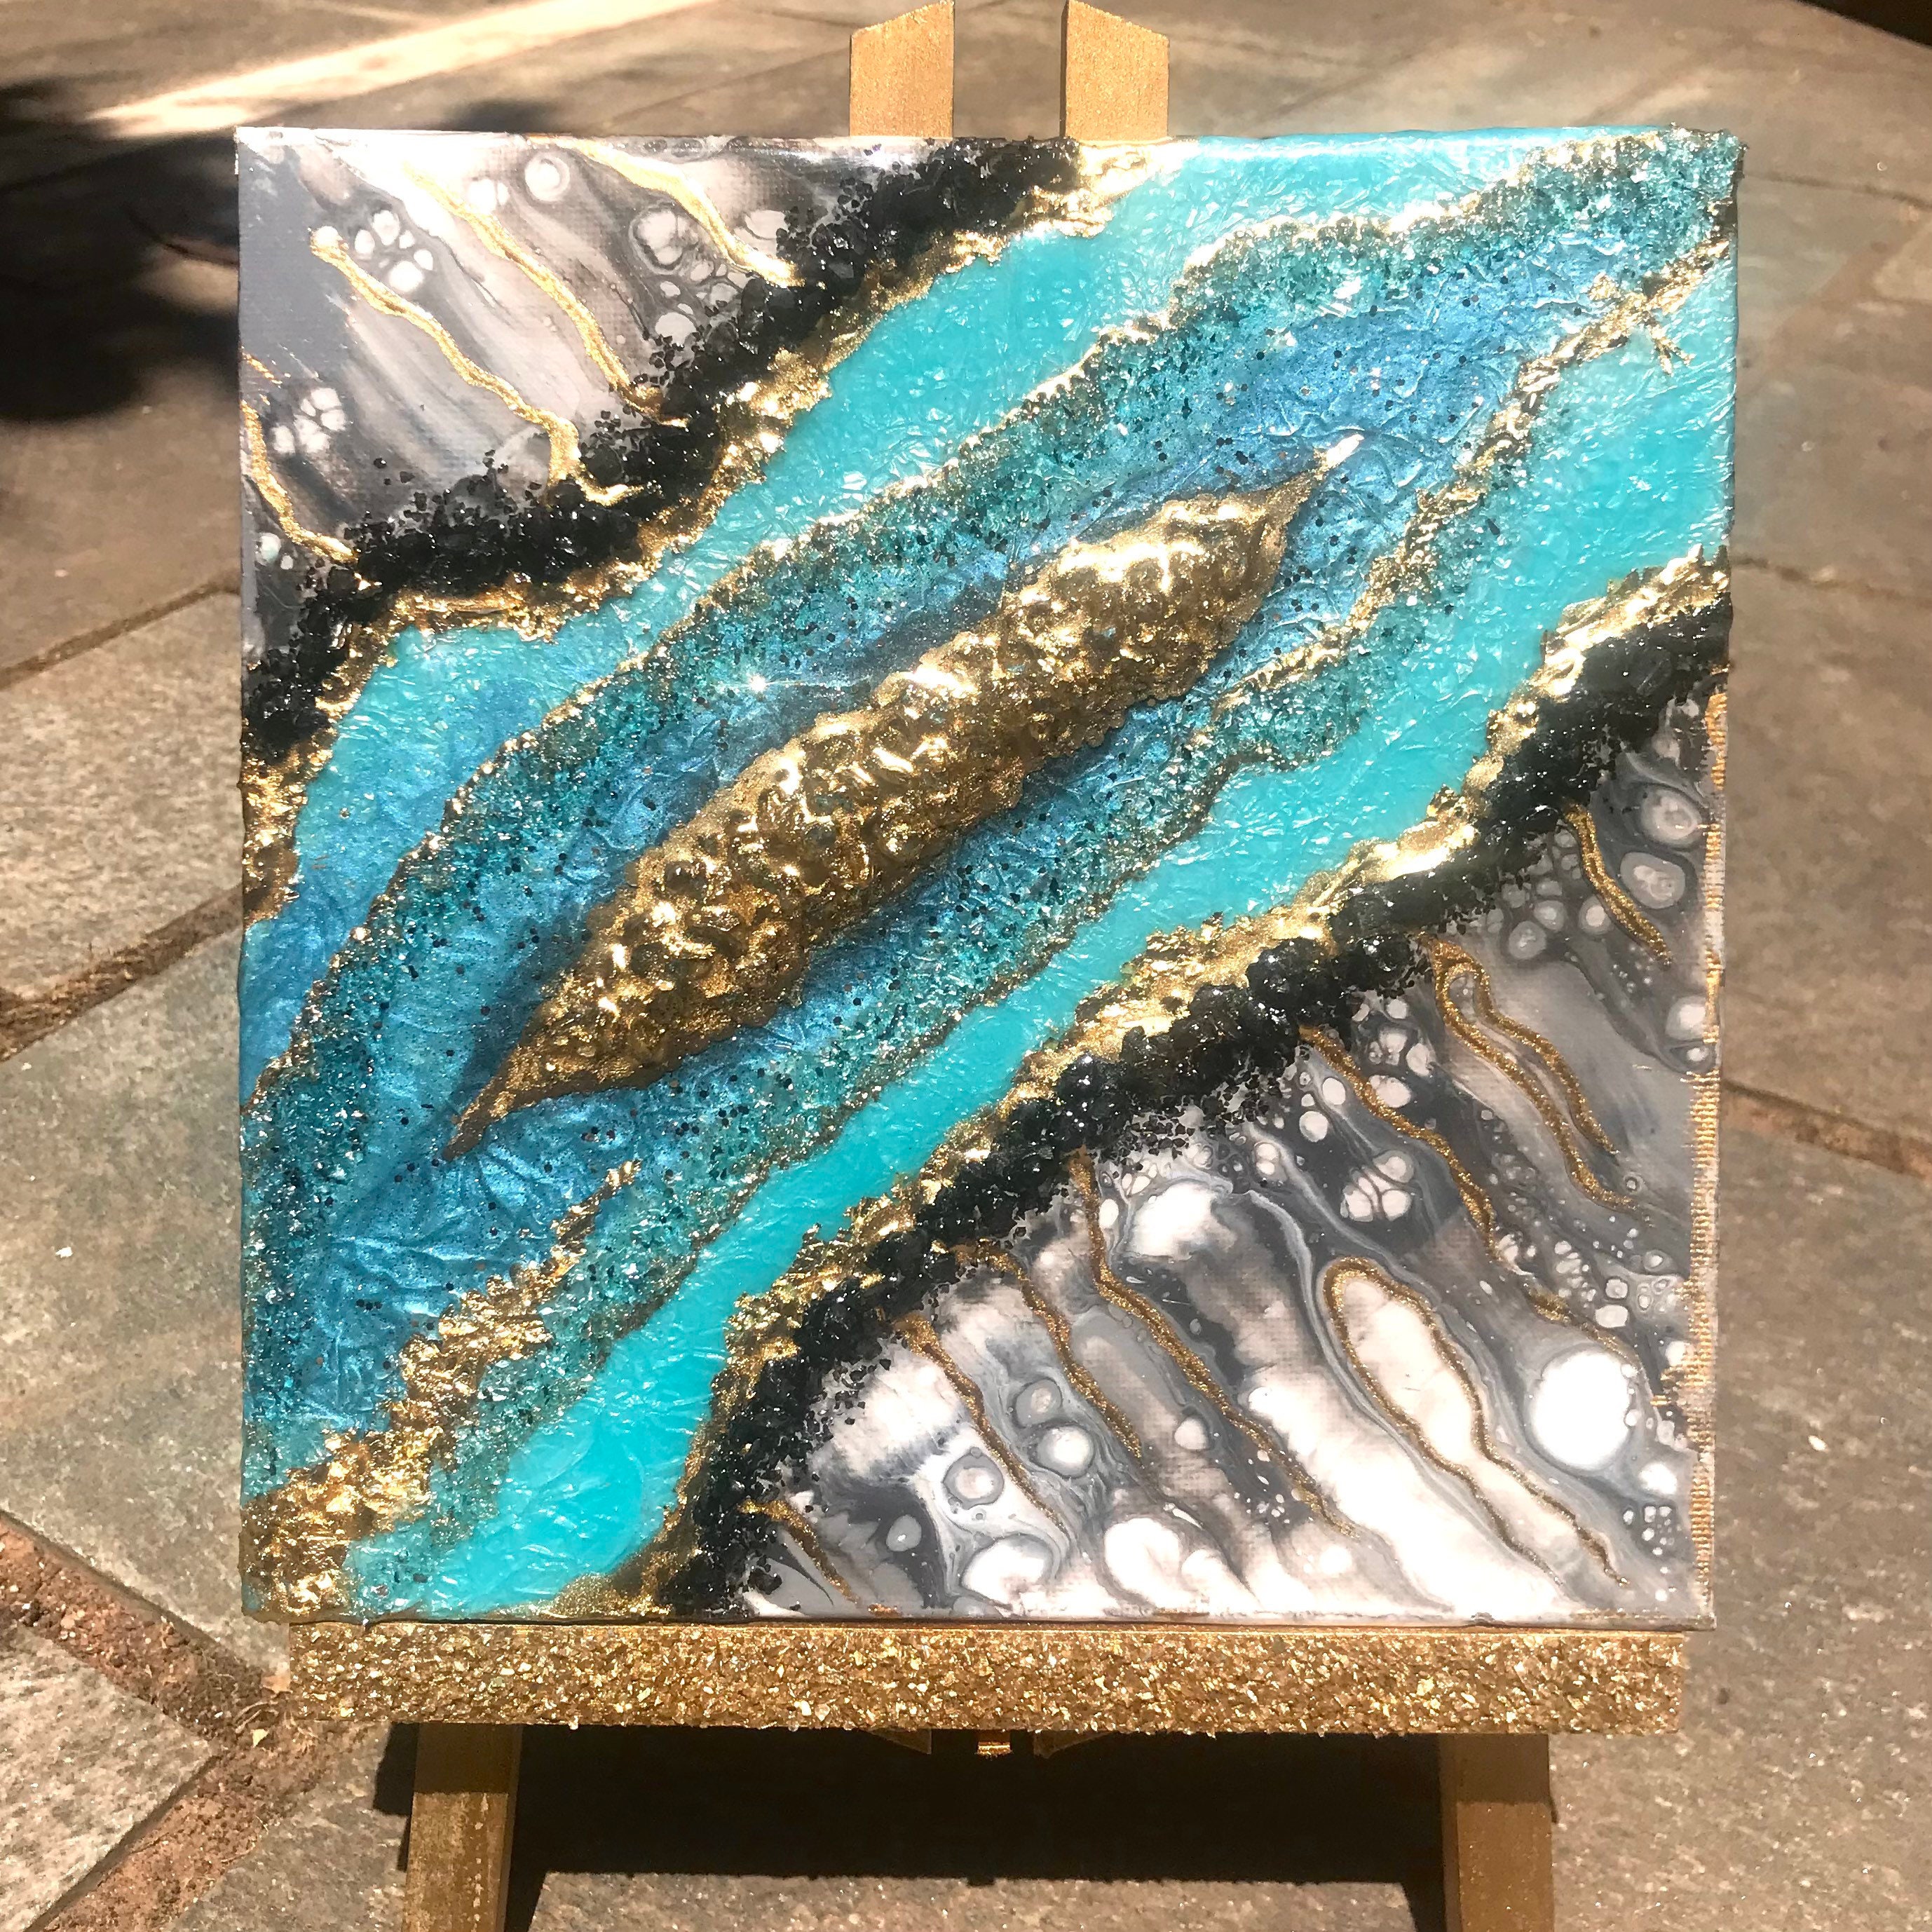 The BEST Acrylic Paint Pour Geode I Have Ever Done - Acrylic Pour Geode -  Acrylic Resin Art 